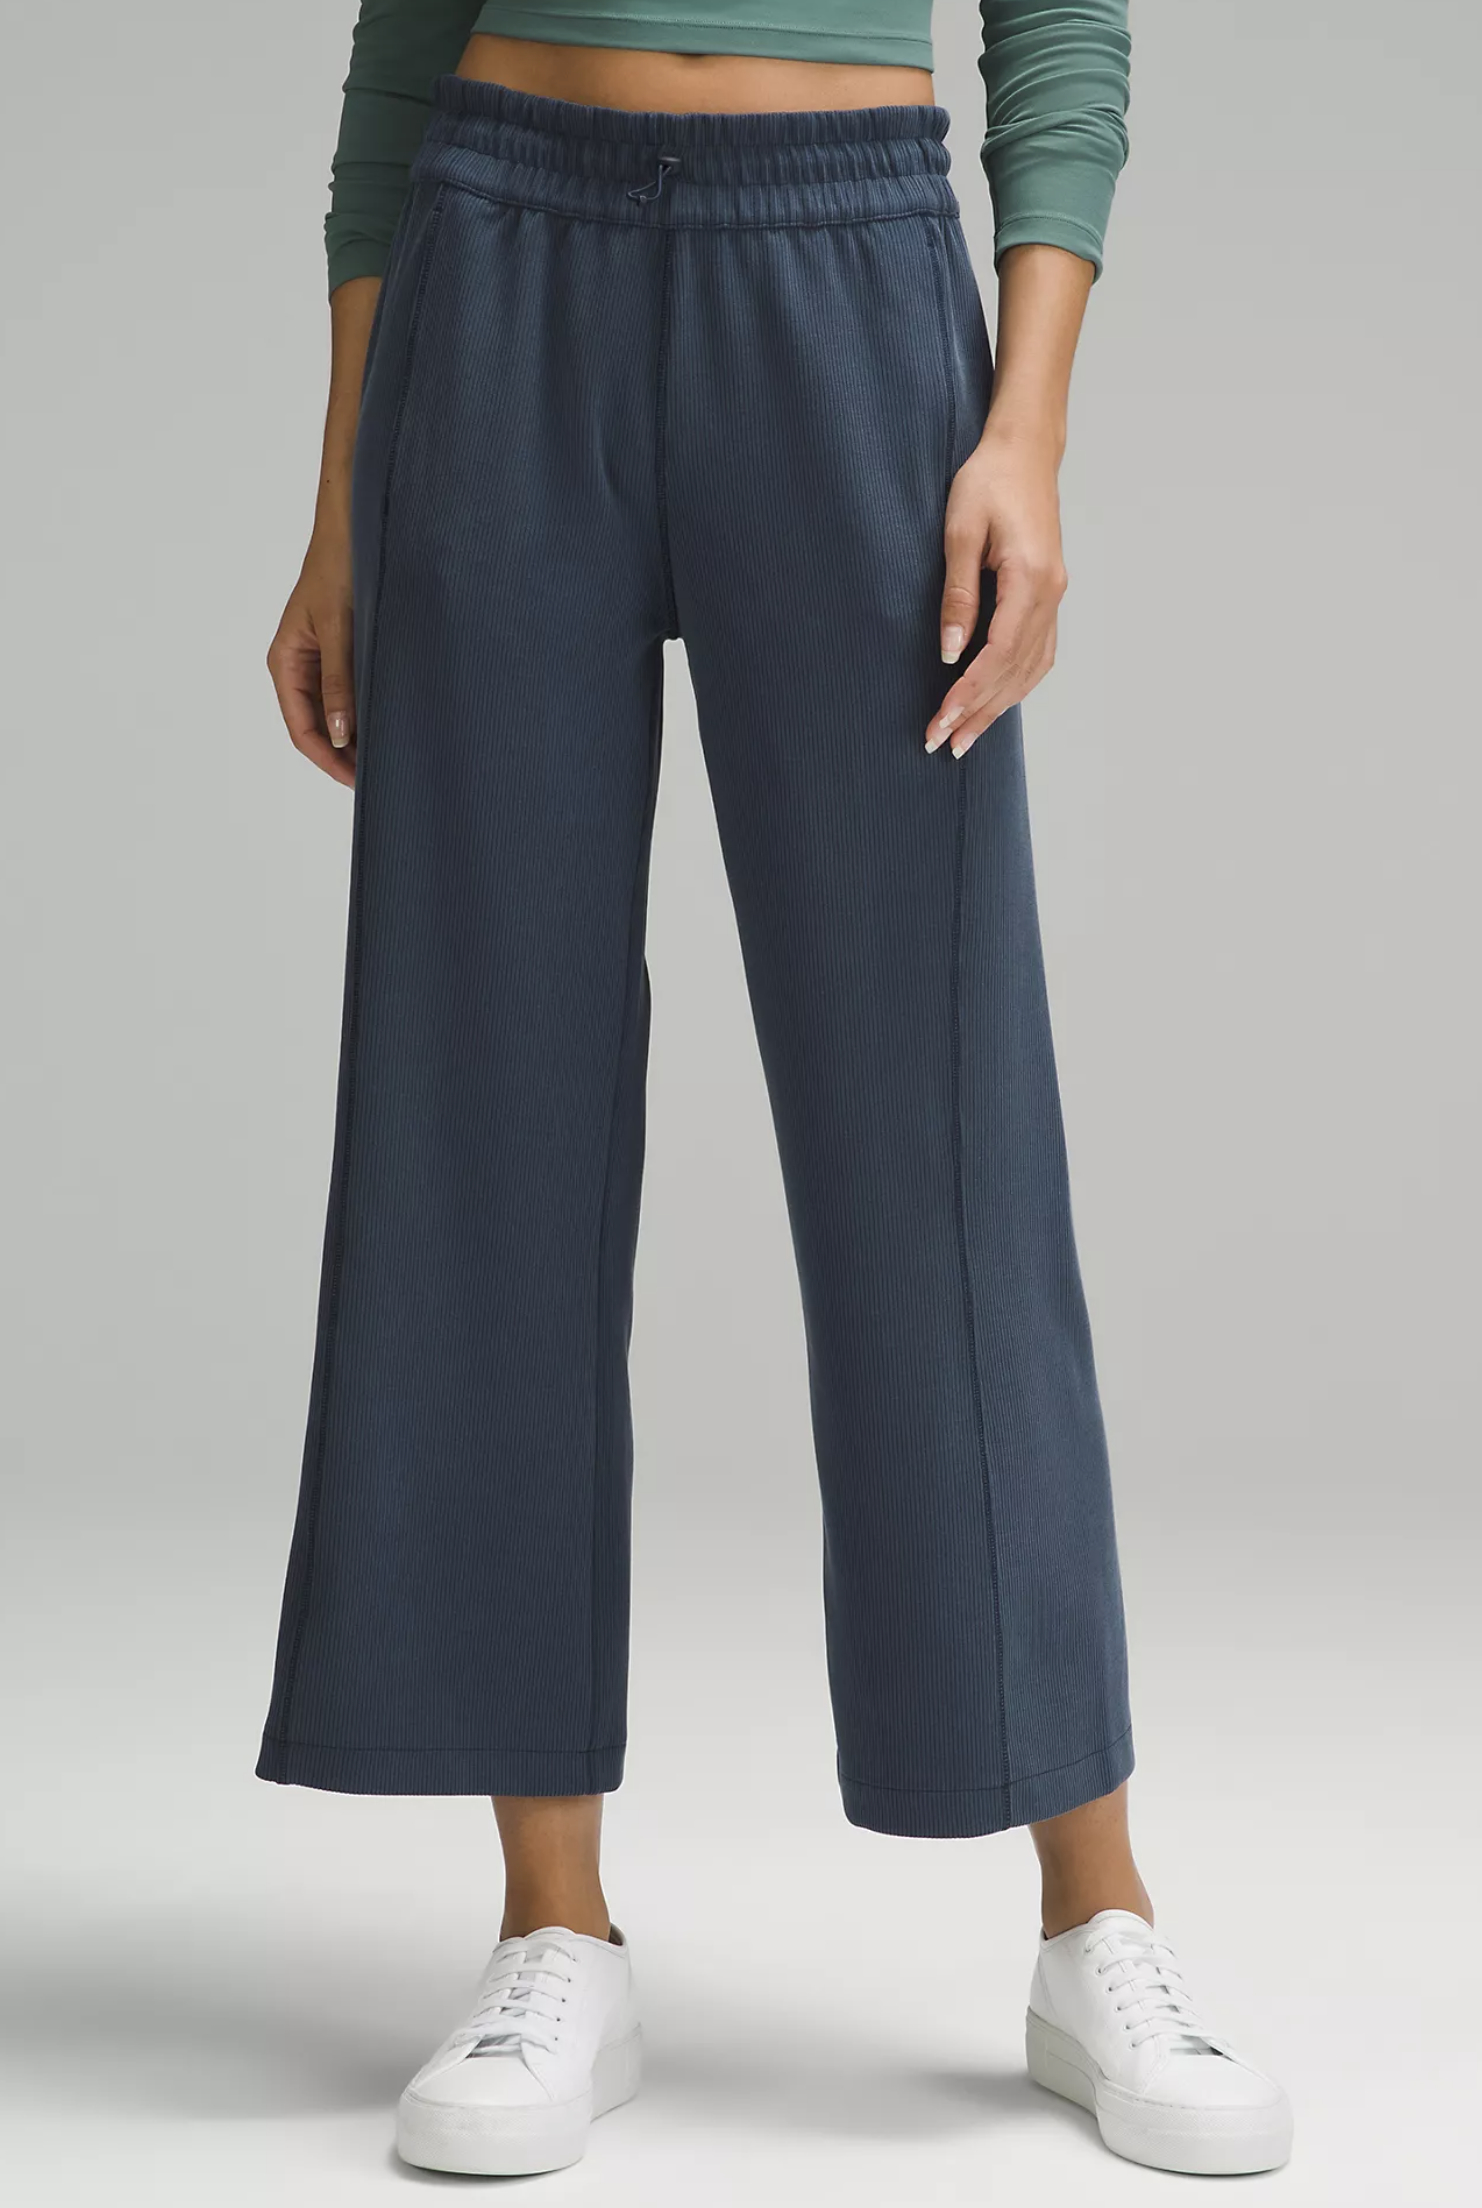 the wide leg pants in navy